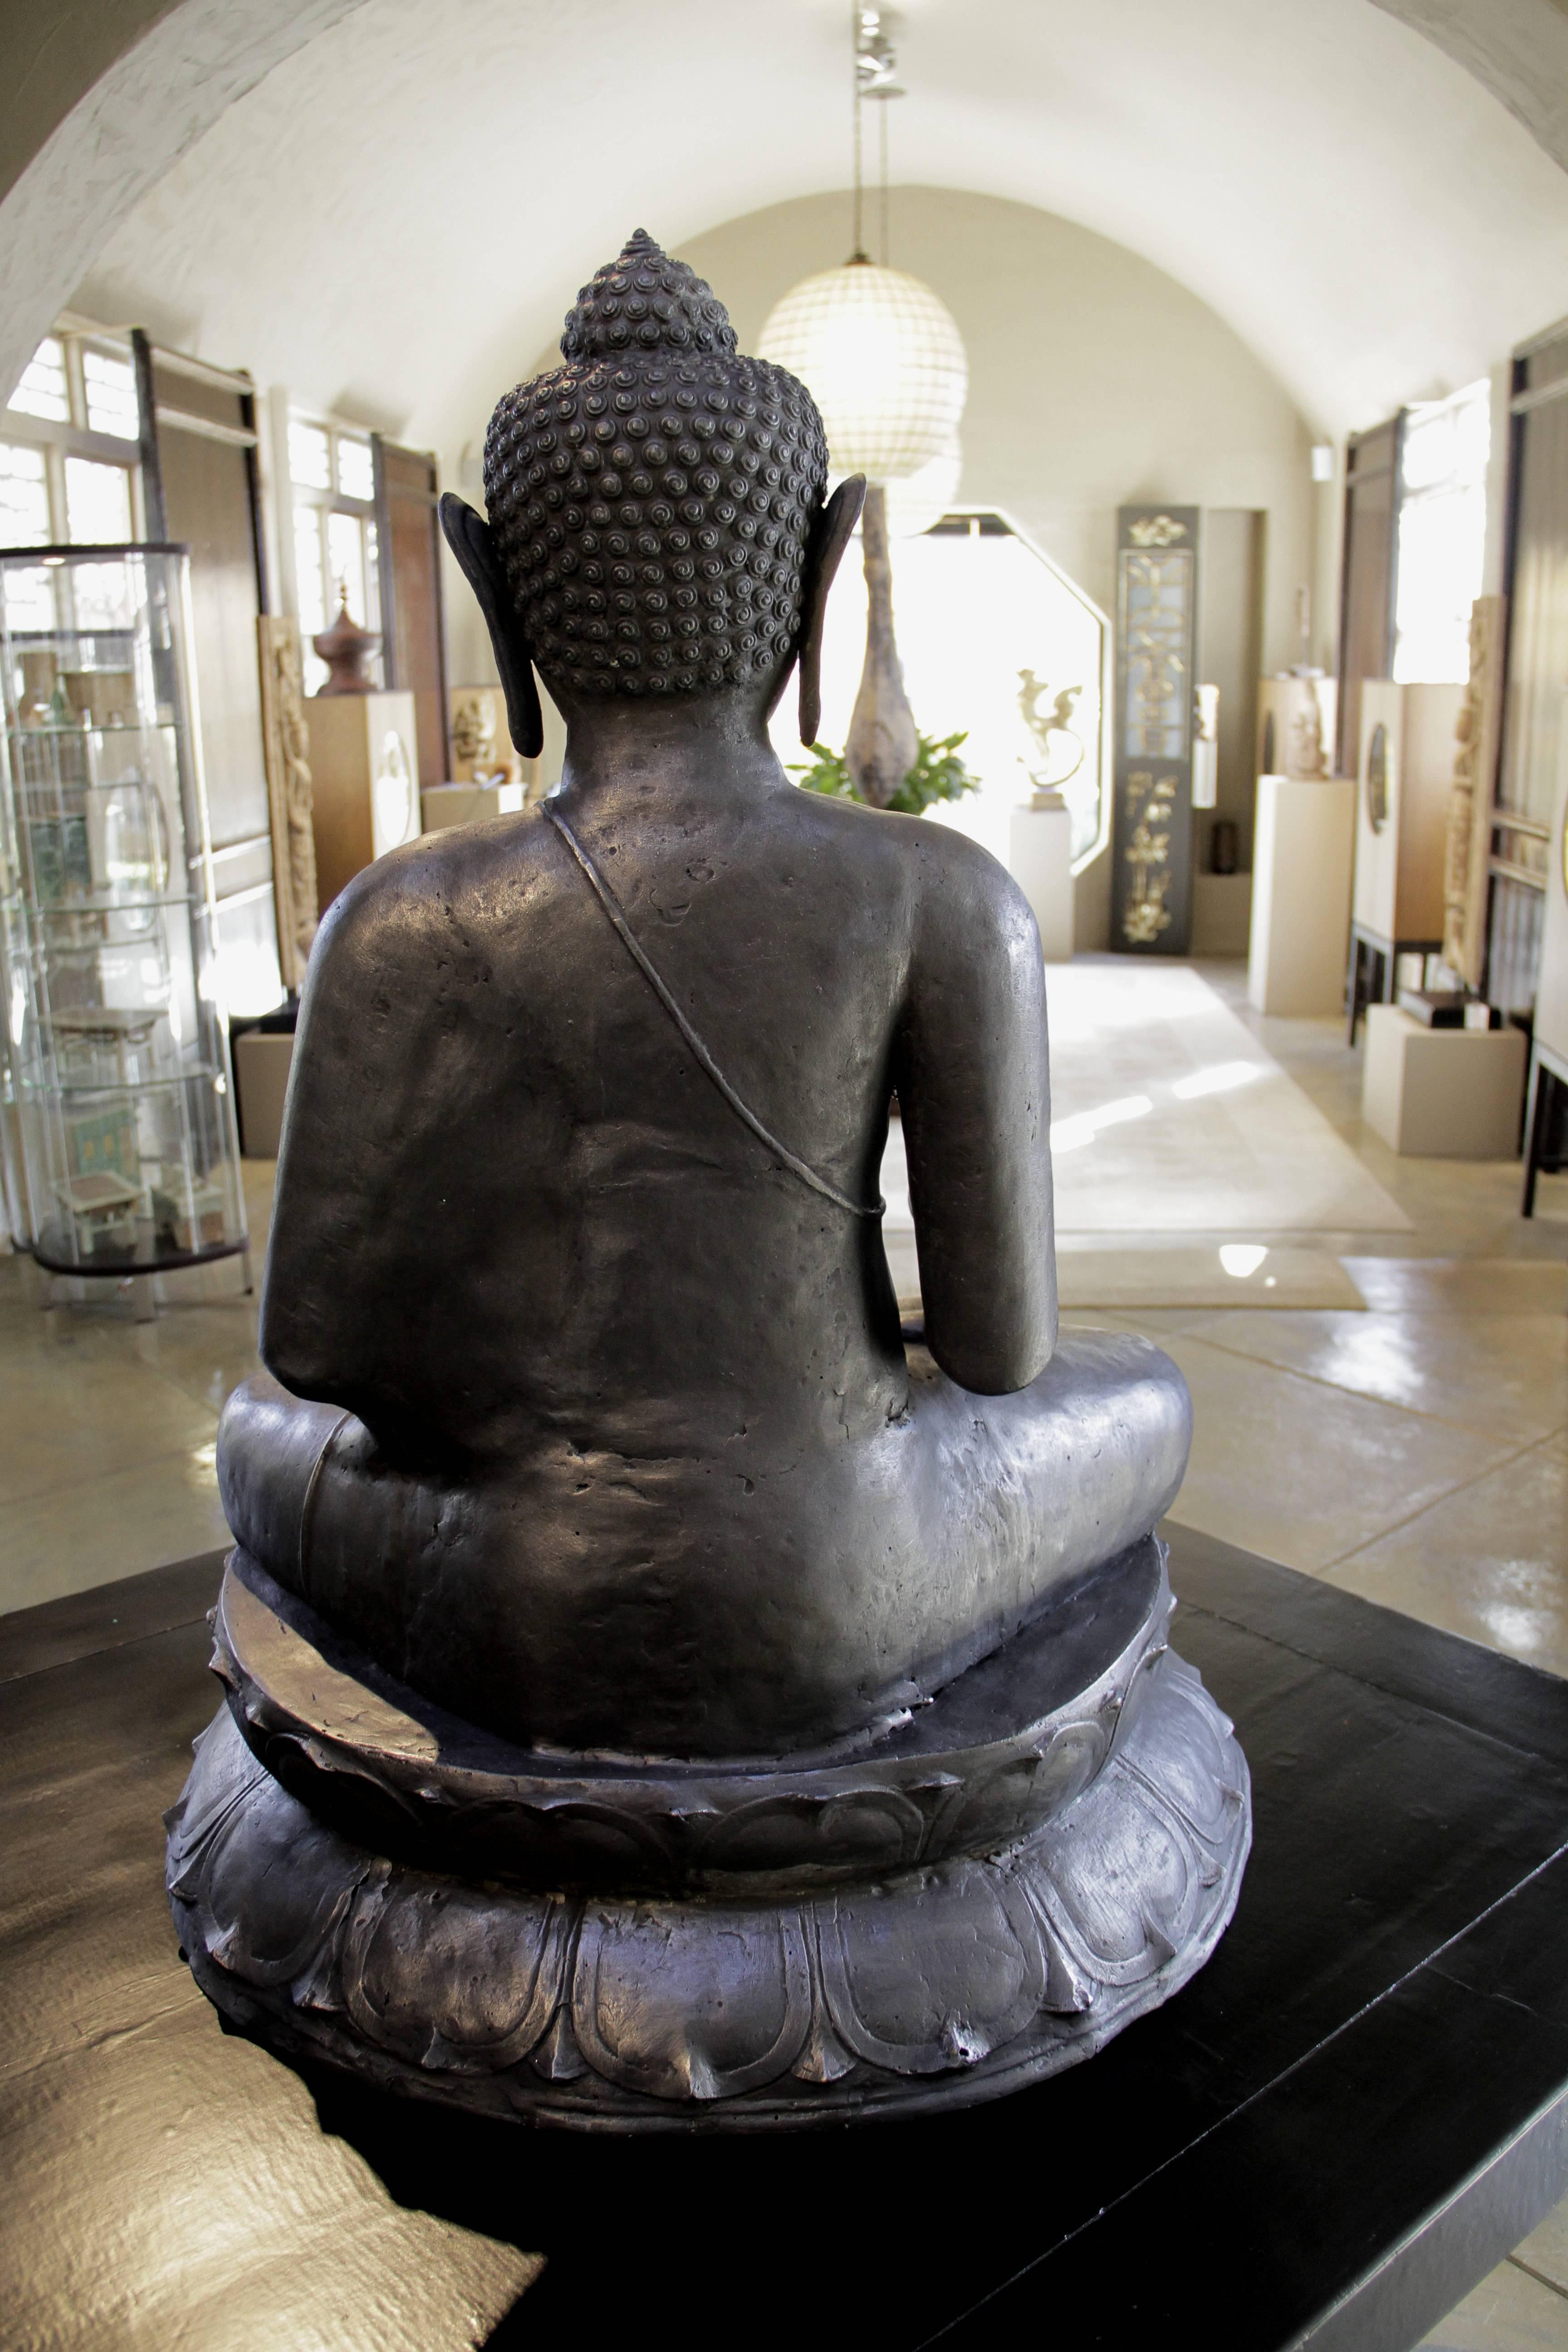 Large copper seated Buddha from Java

In the style of a Javanese Esoteric Buddha of the 7th-15th century, this Classic Buddha is seated on a large double-lotus pedestal in the cross-legged meditative posture of vajraparyankasana with the right leg